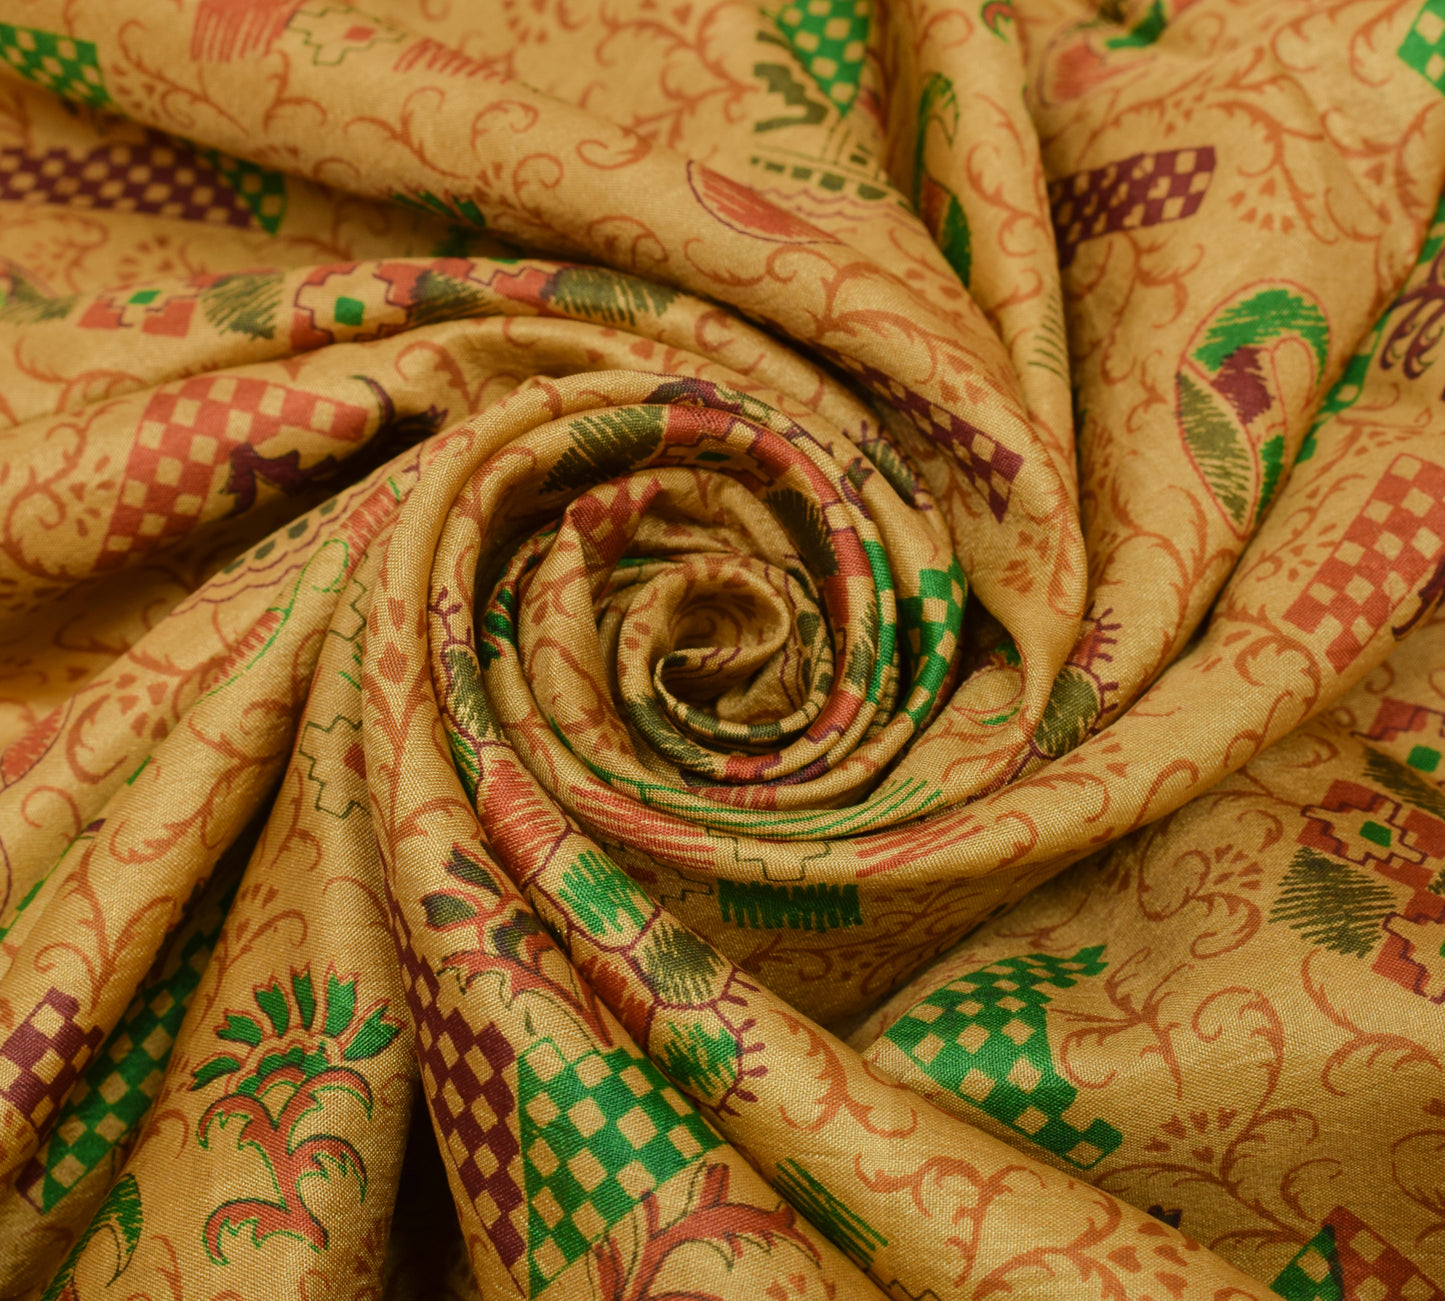 Sari Artwork Vintage Scrap Fabric for Crafting Projects - Fabric Lots